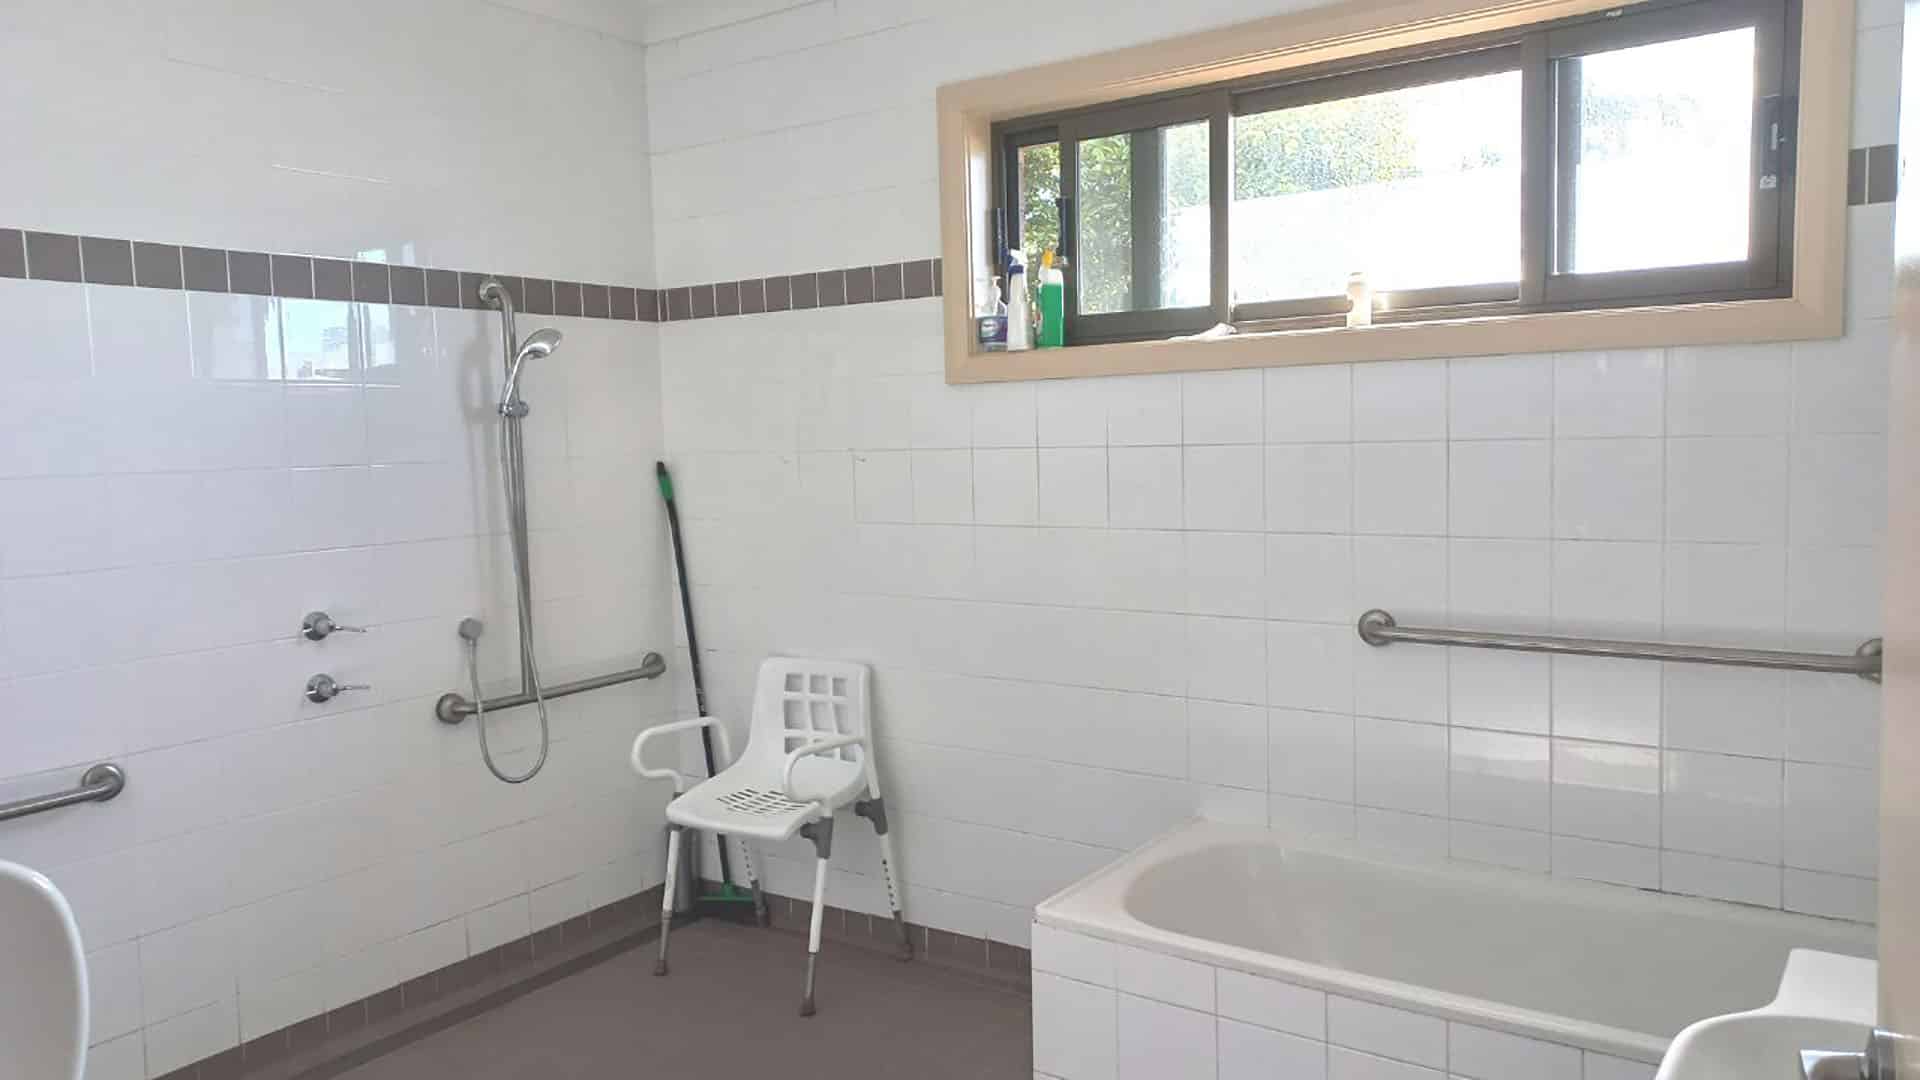 A bathroom with a shower area and bath under a window.